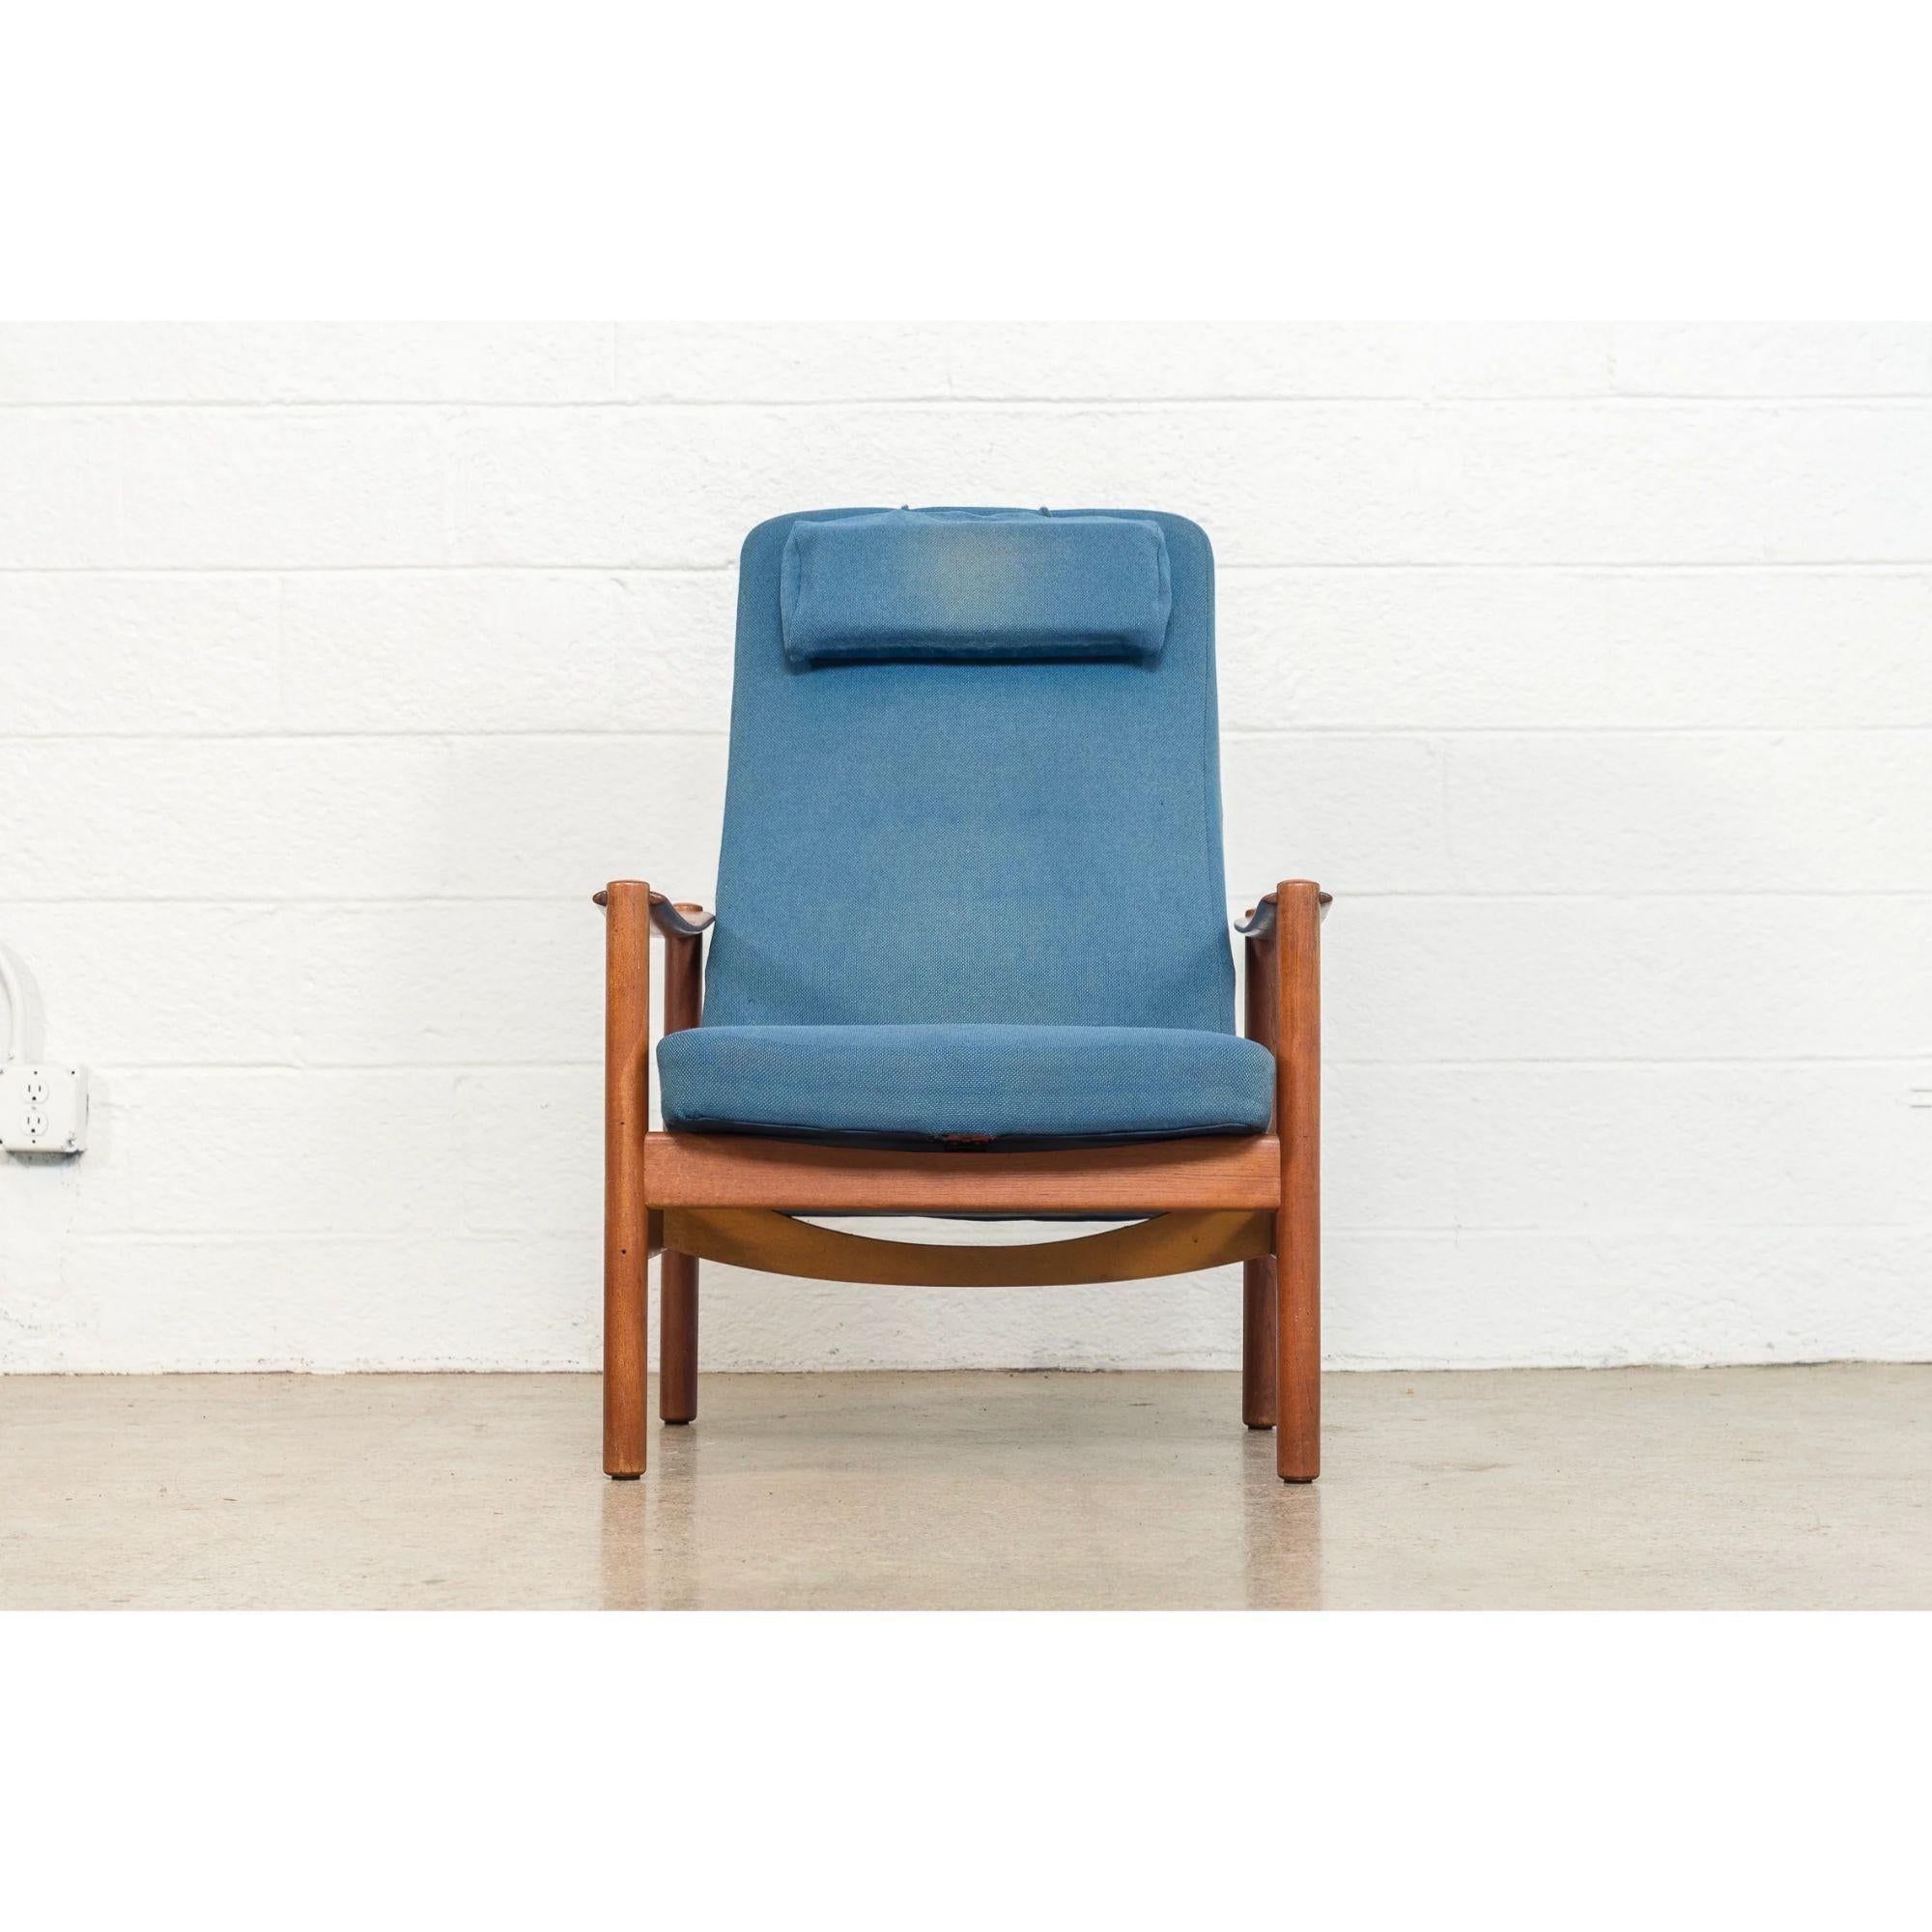 Unknown Mid Century Swedish Reclining Lounge Chair in Teak by Folke Ohlsson, circa 1960